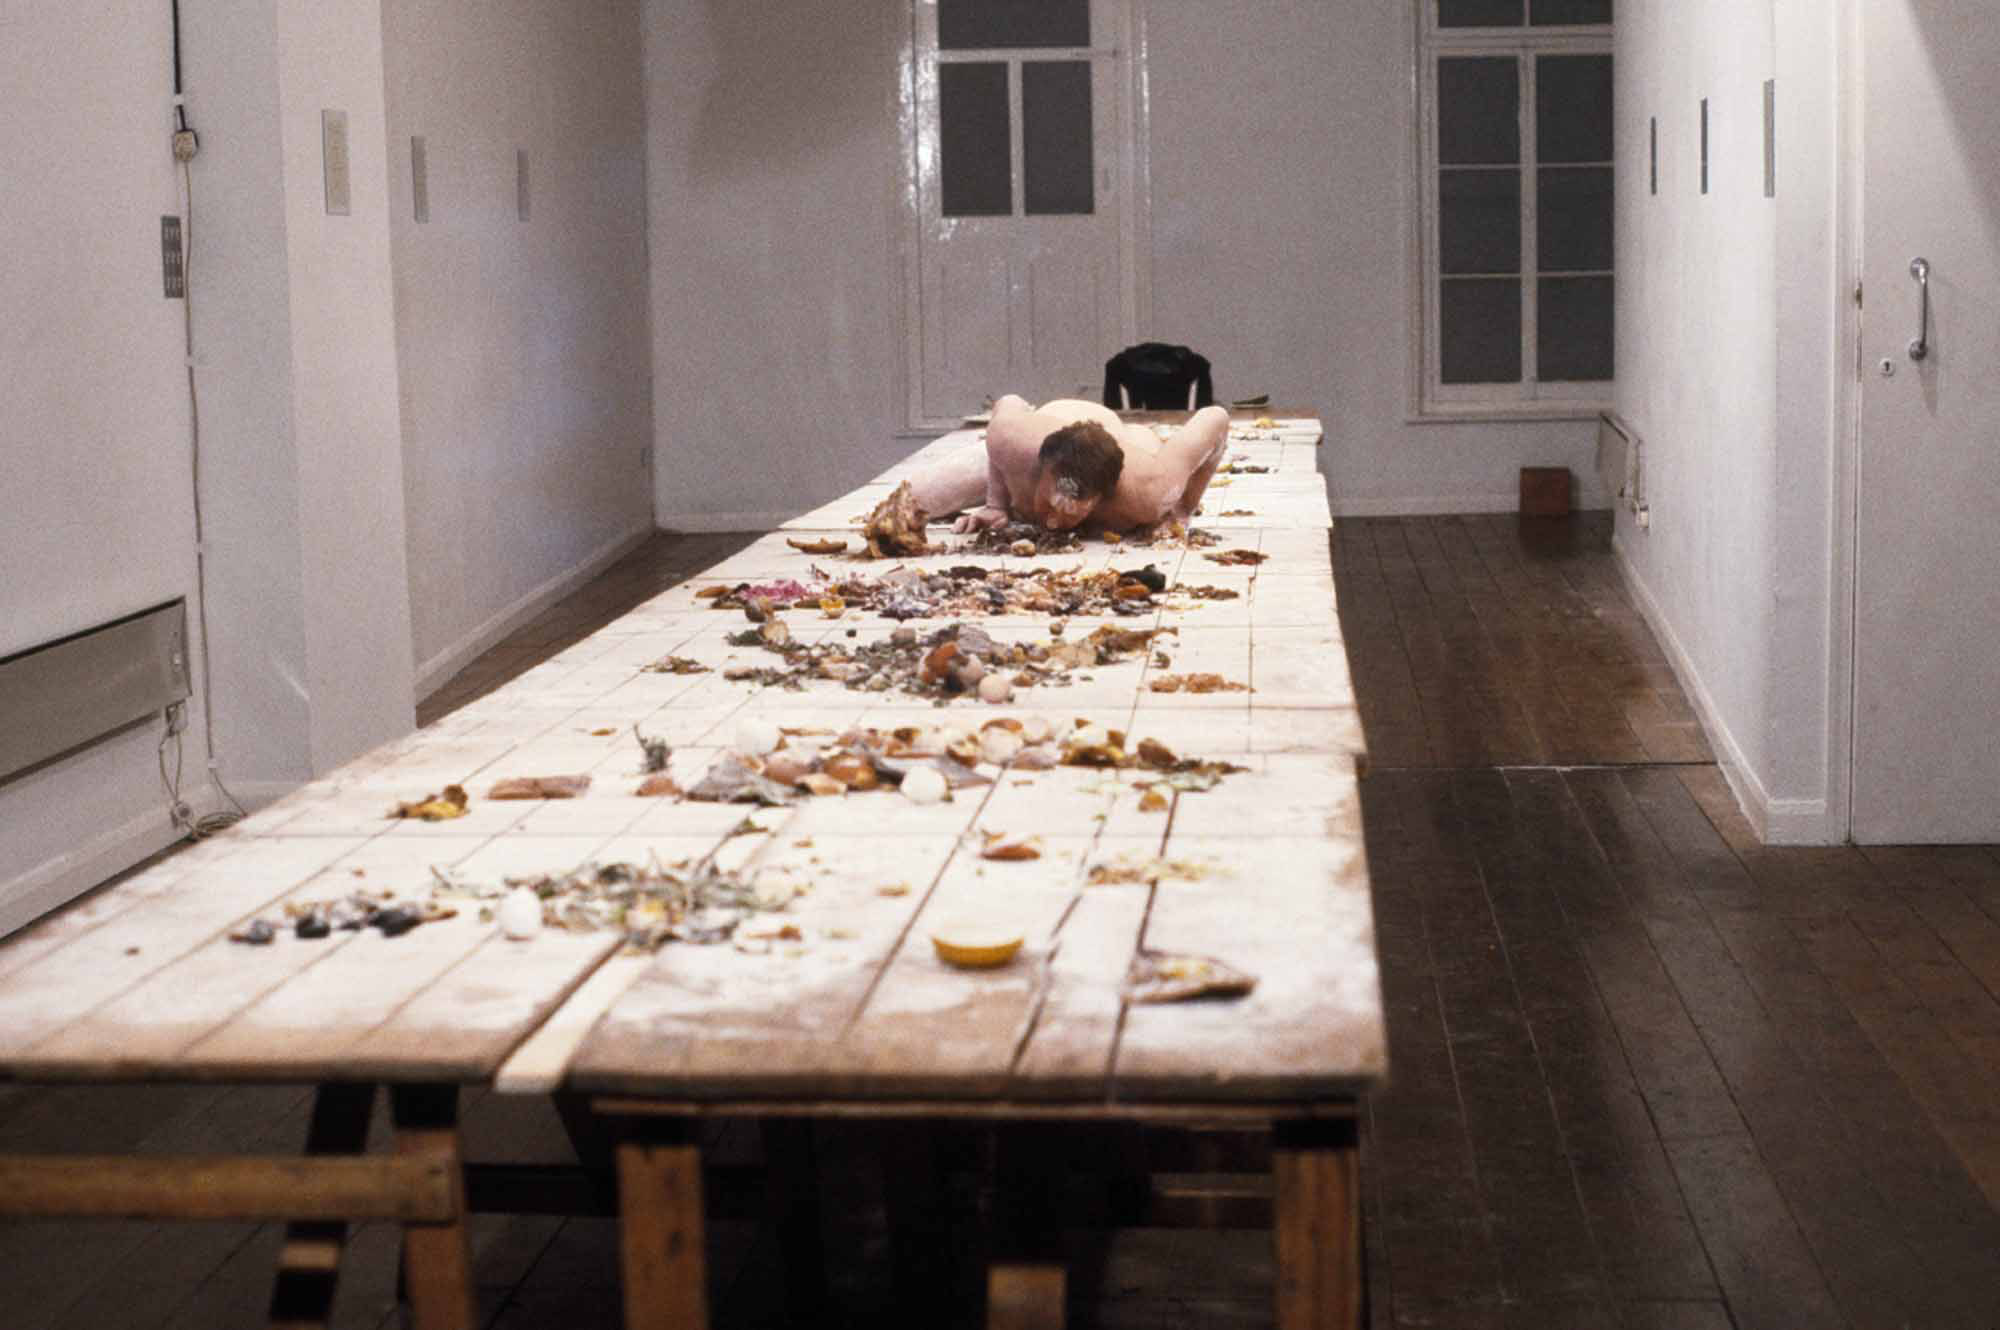 Stuart Brisley, 10 days A ritualised de-construction of the ritual by Stuart Brisley in association with Manfred Blob at The Acme Gallery, London, 21 – 31 December (1978). Courtesy of Acme, Acme Archive.